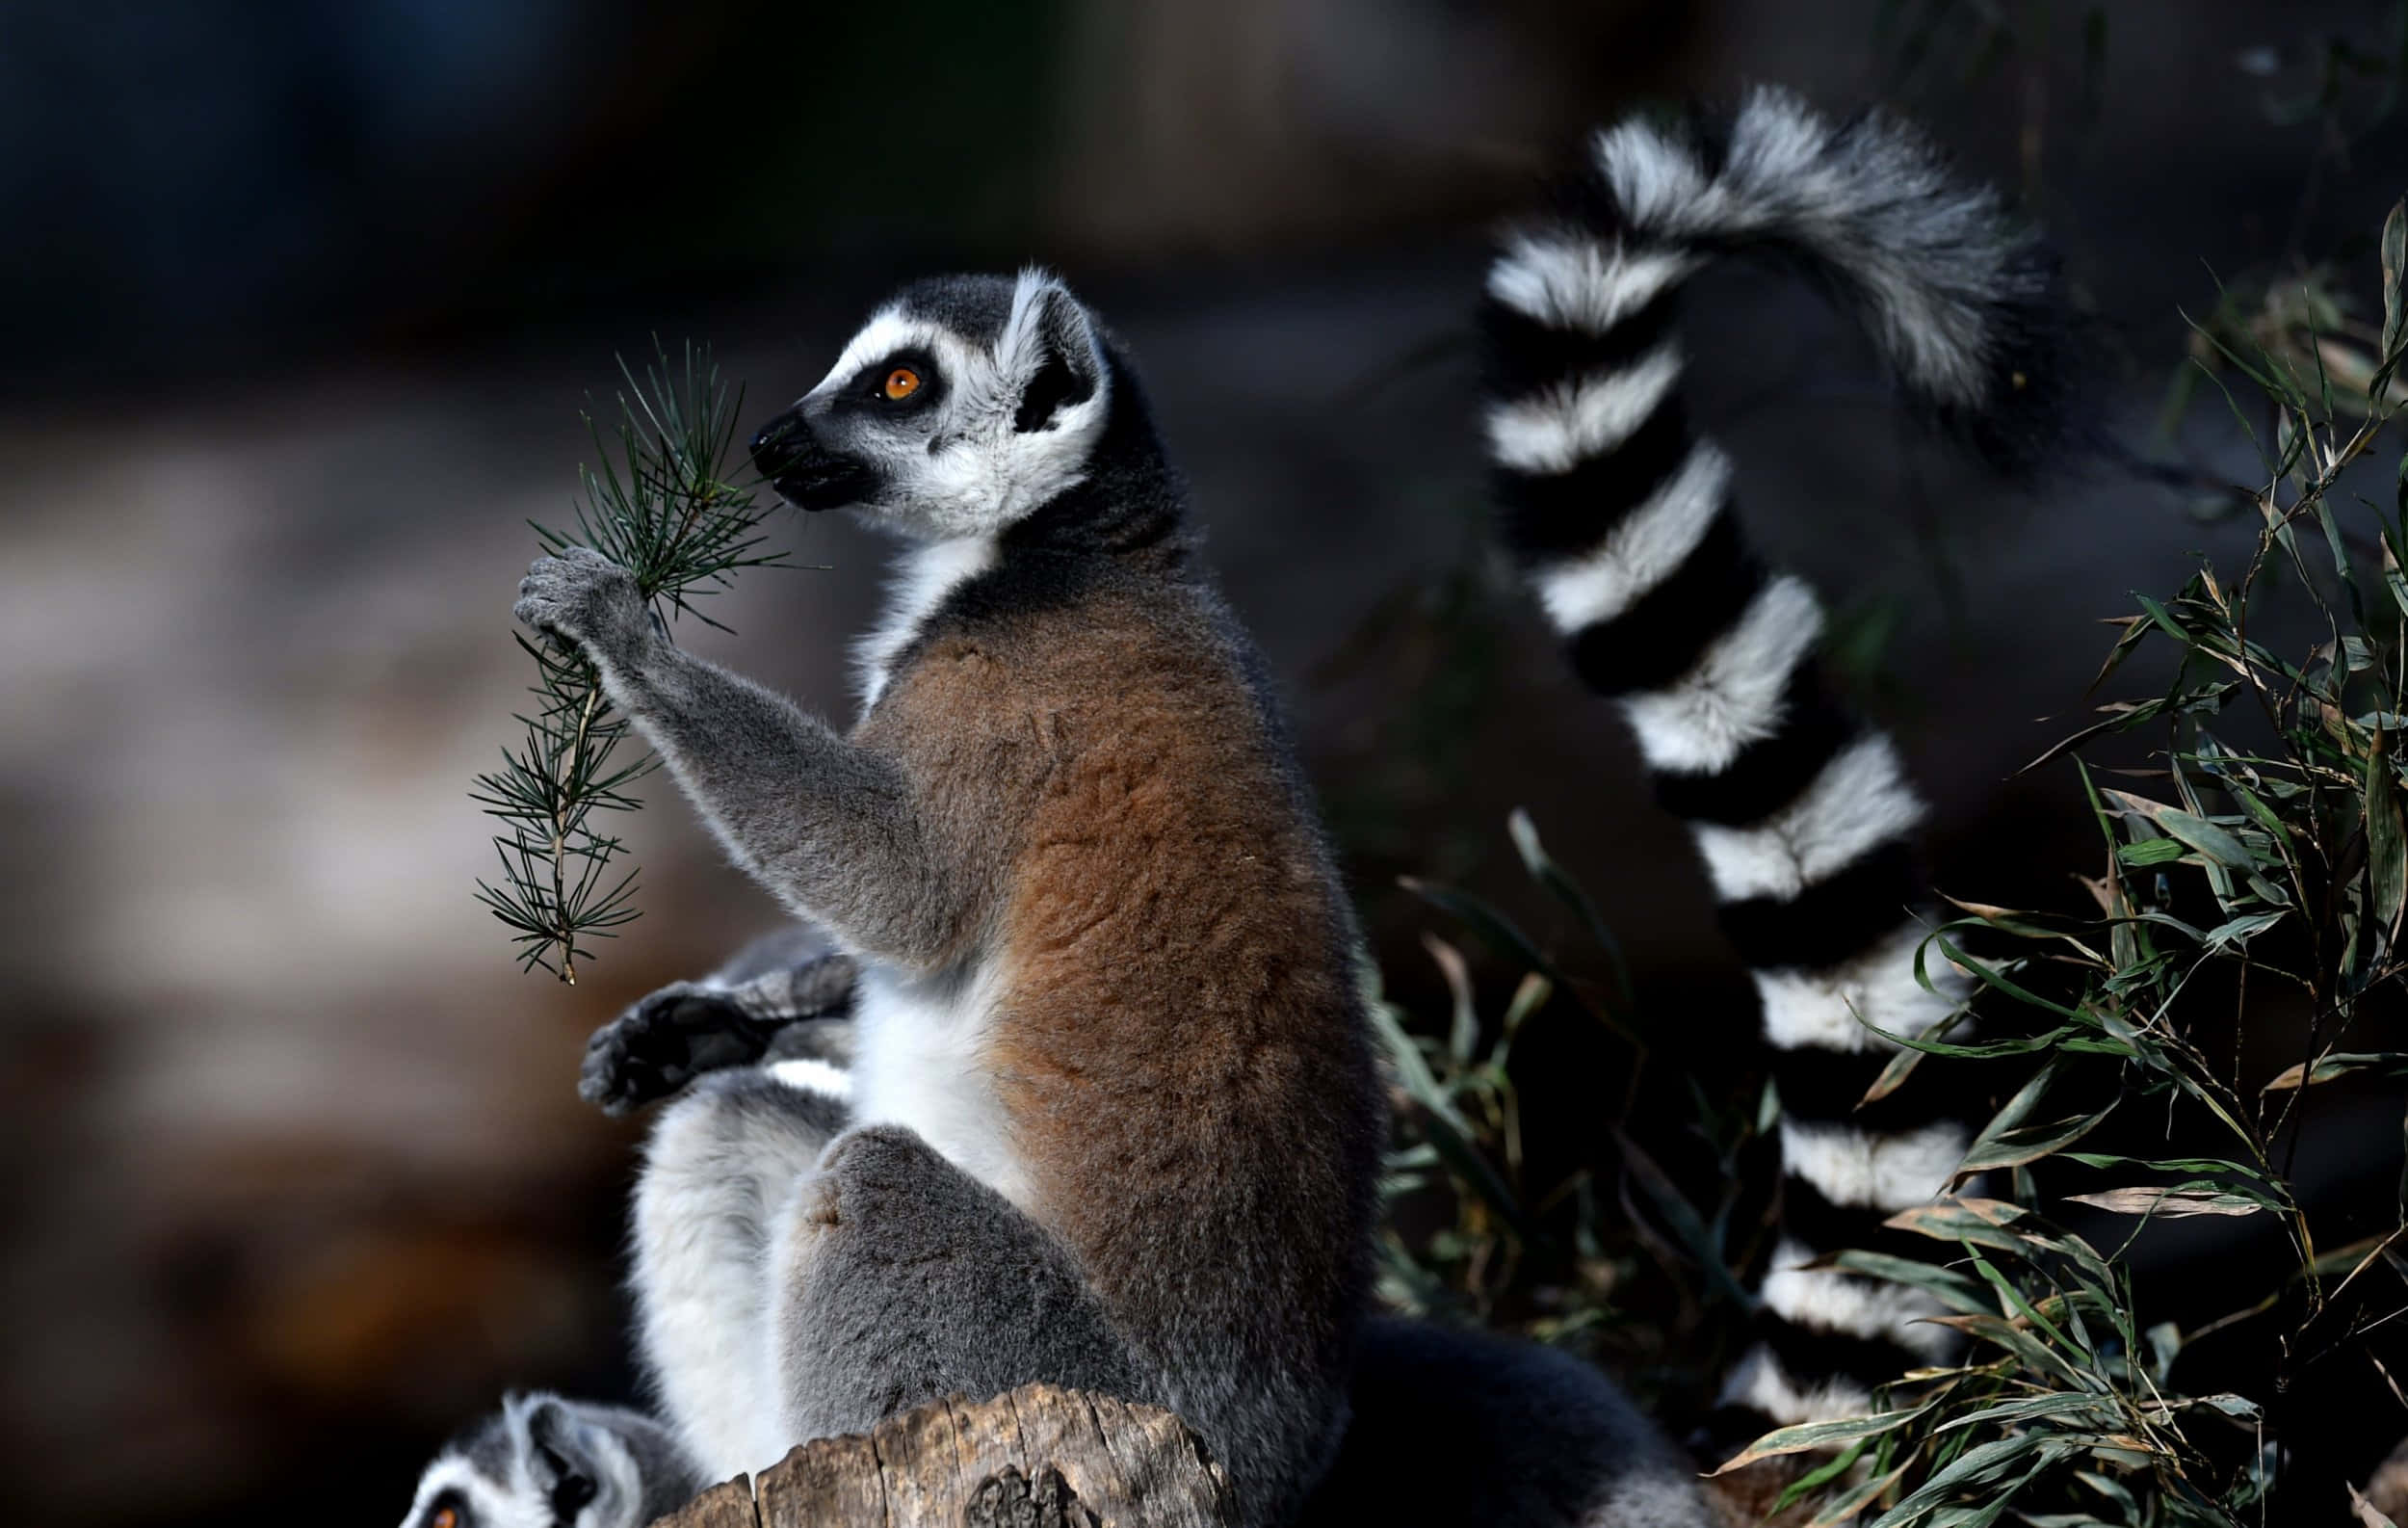 Stunning Portrait Of A Lemur In Its Natural Habitat Background